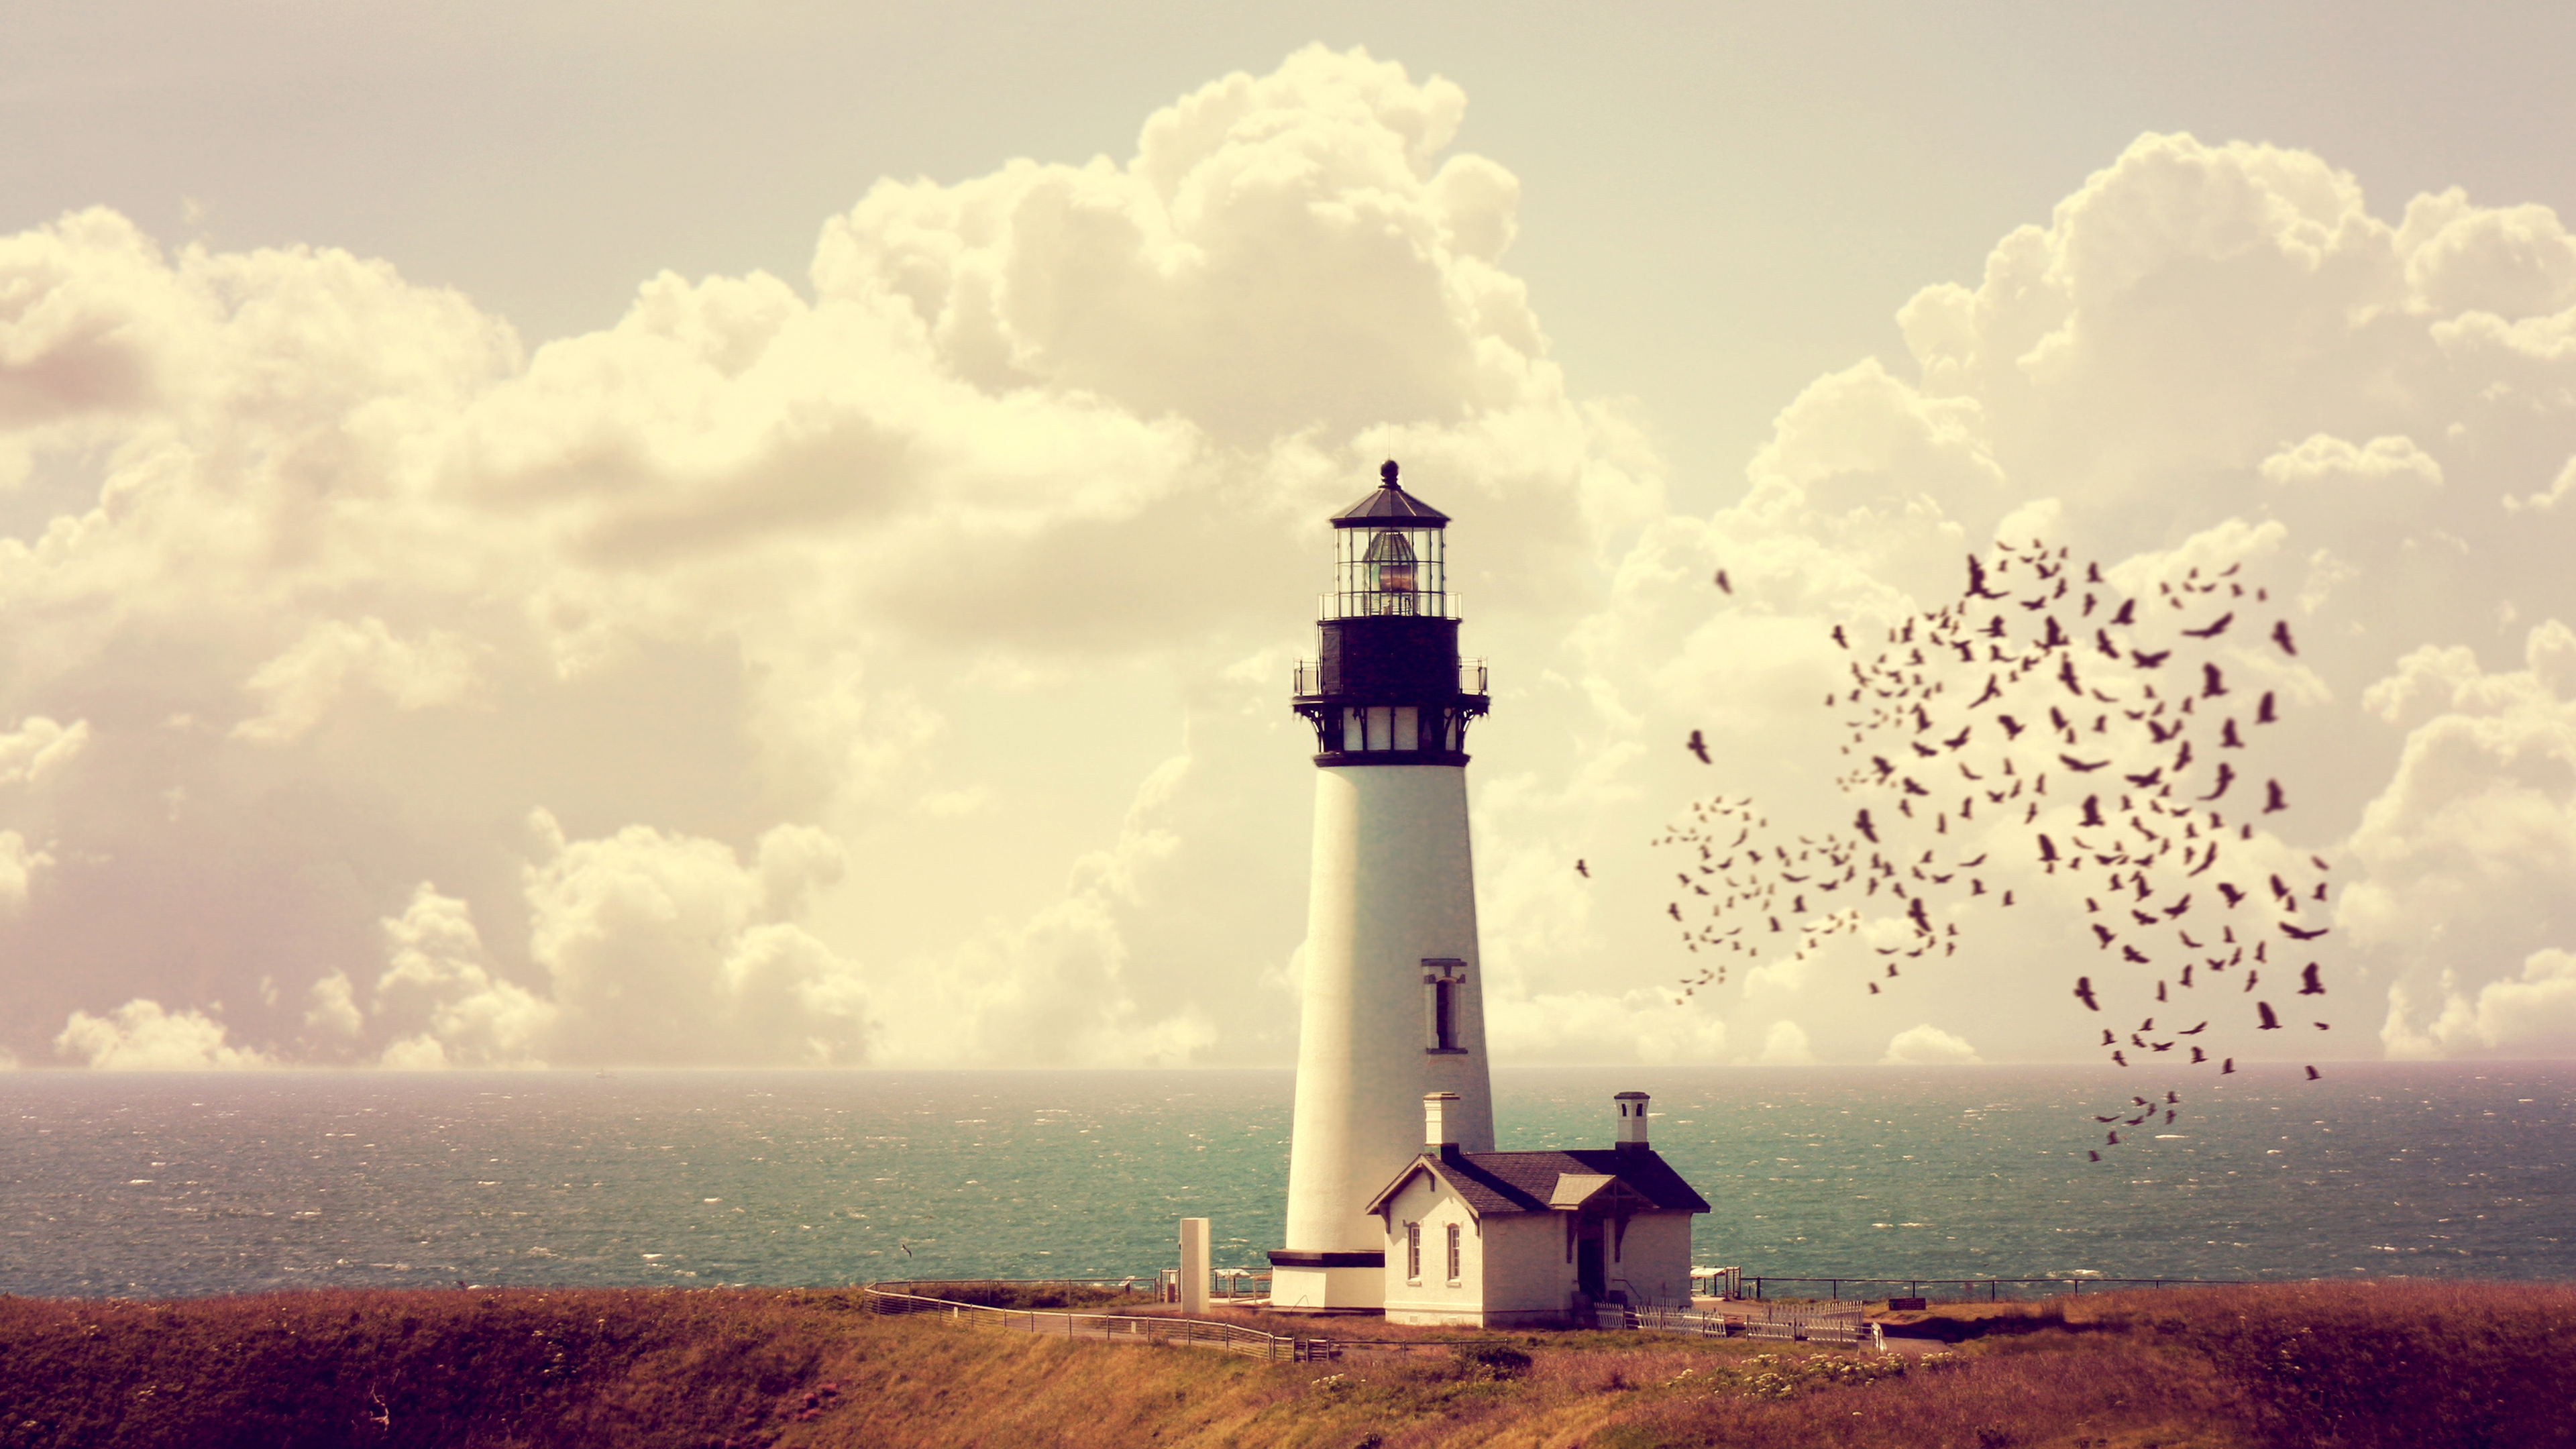 Vintage Light House for 3840 x 2160 Ultra HD resolution